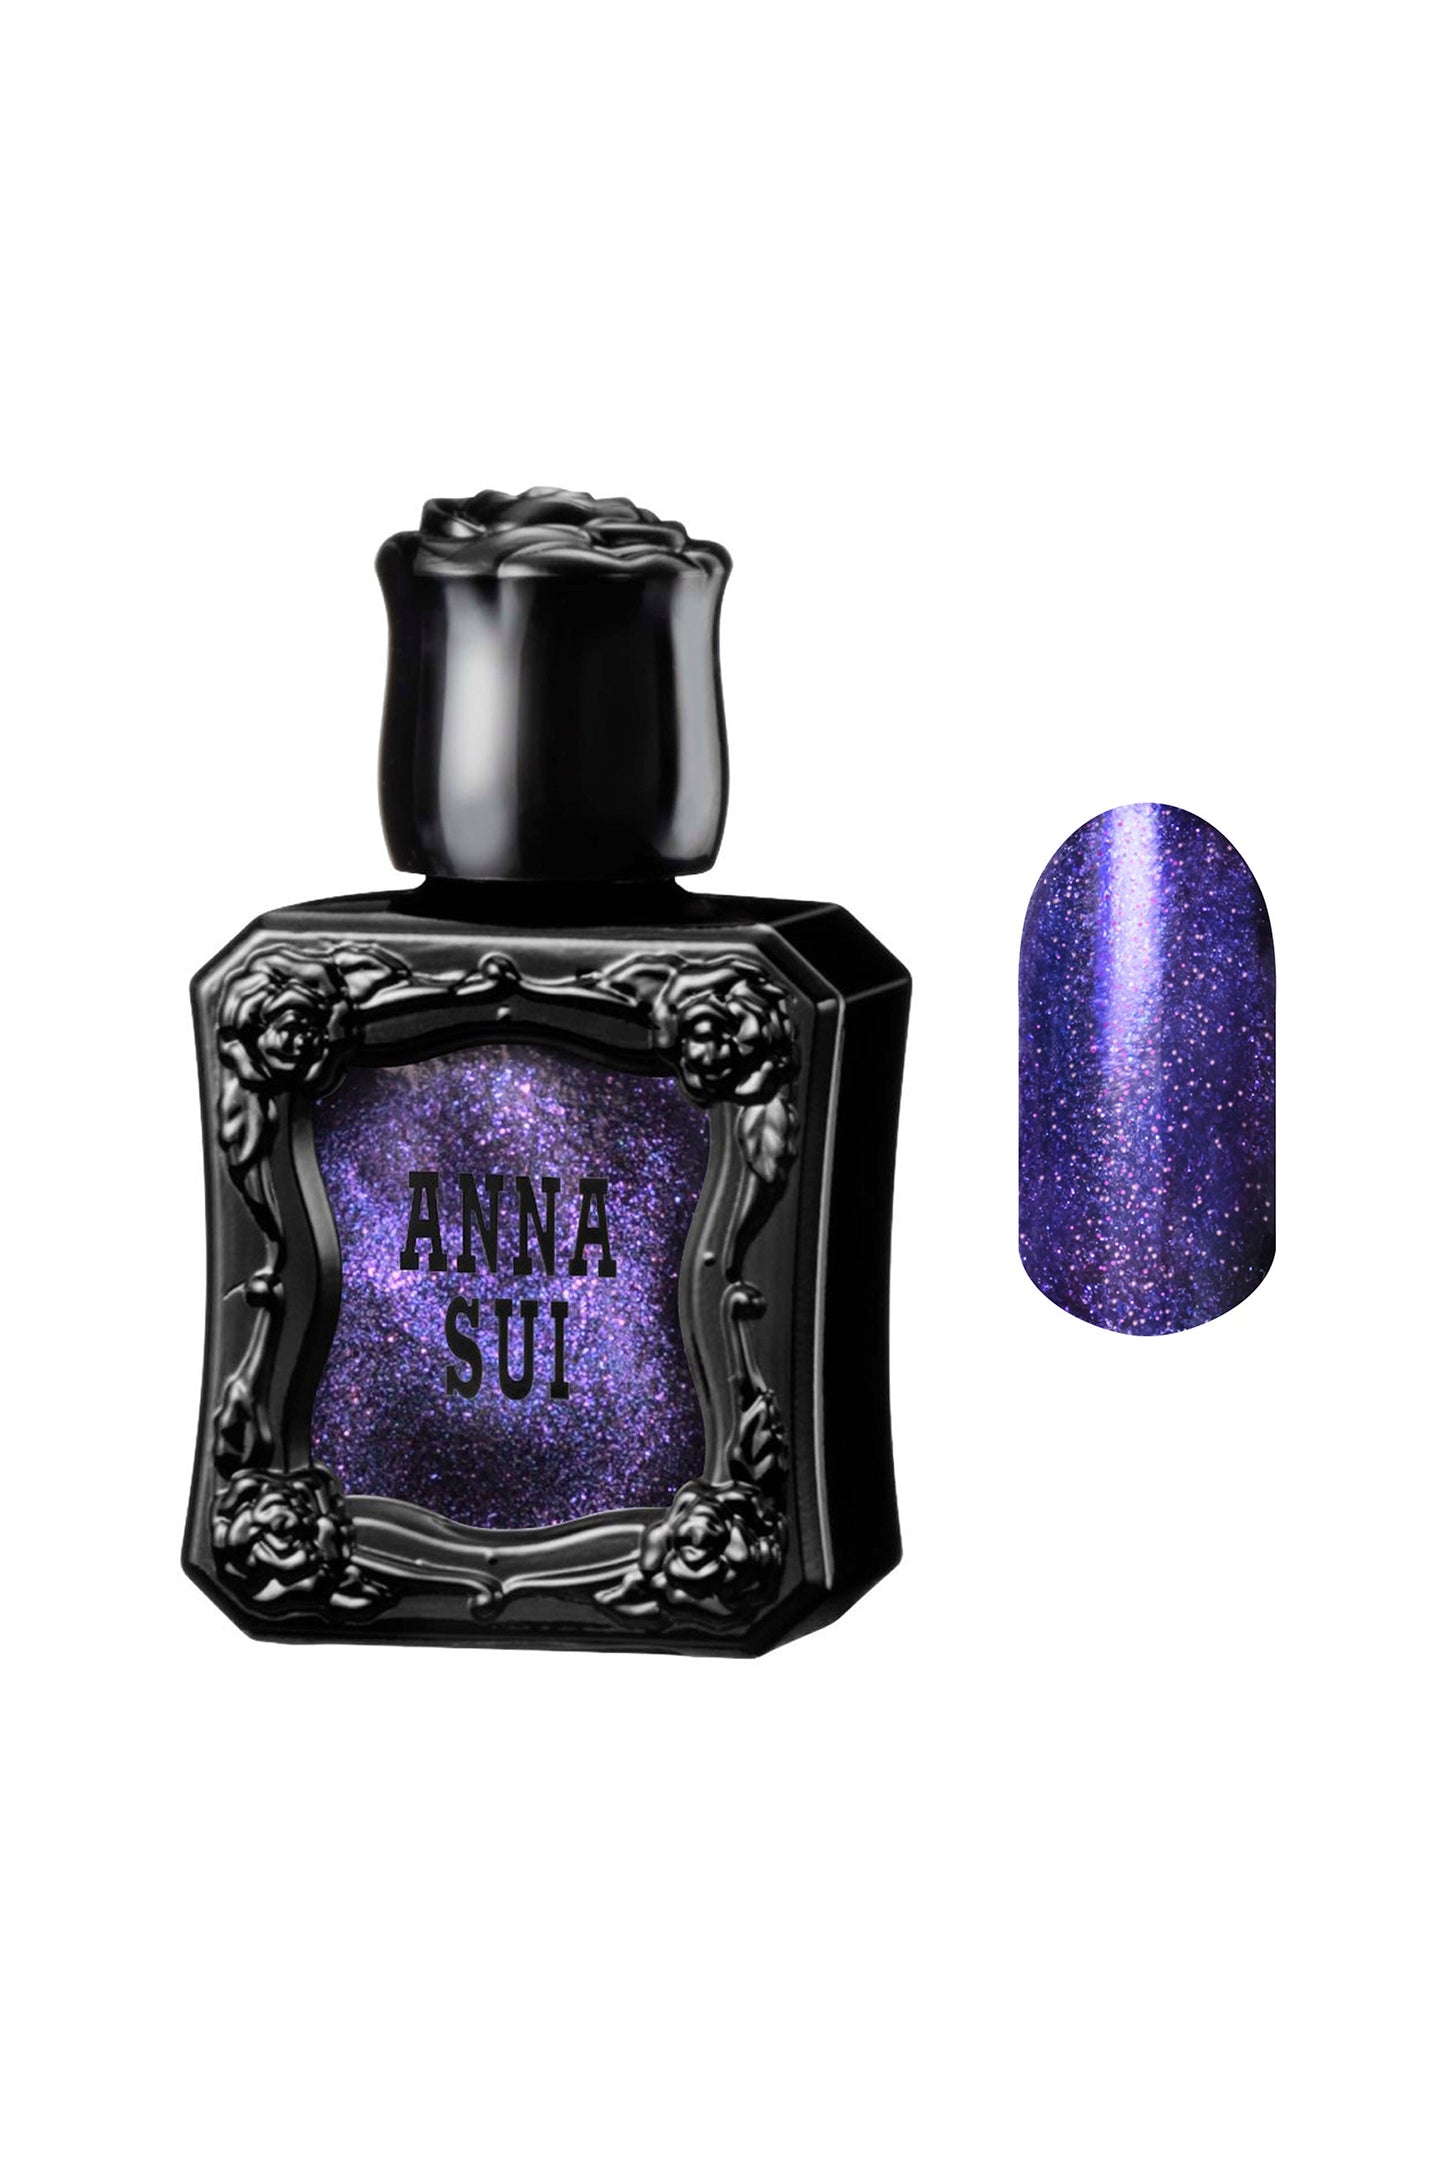 PURPLE MOONLIGHT Polish bottle raised rose pattern, Anna Sui in black over nail colors in front